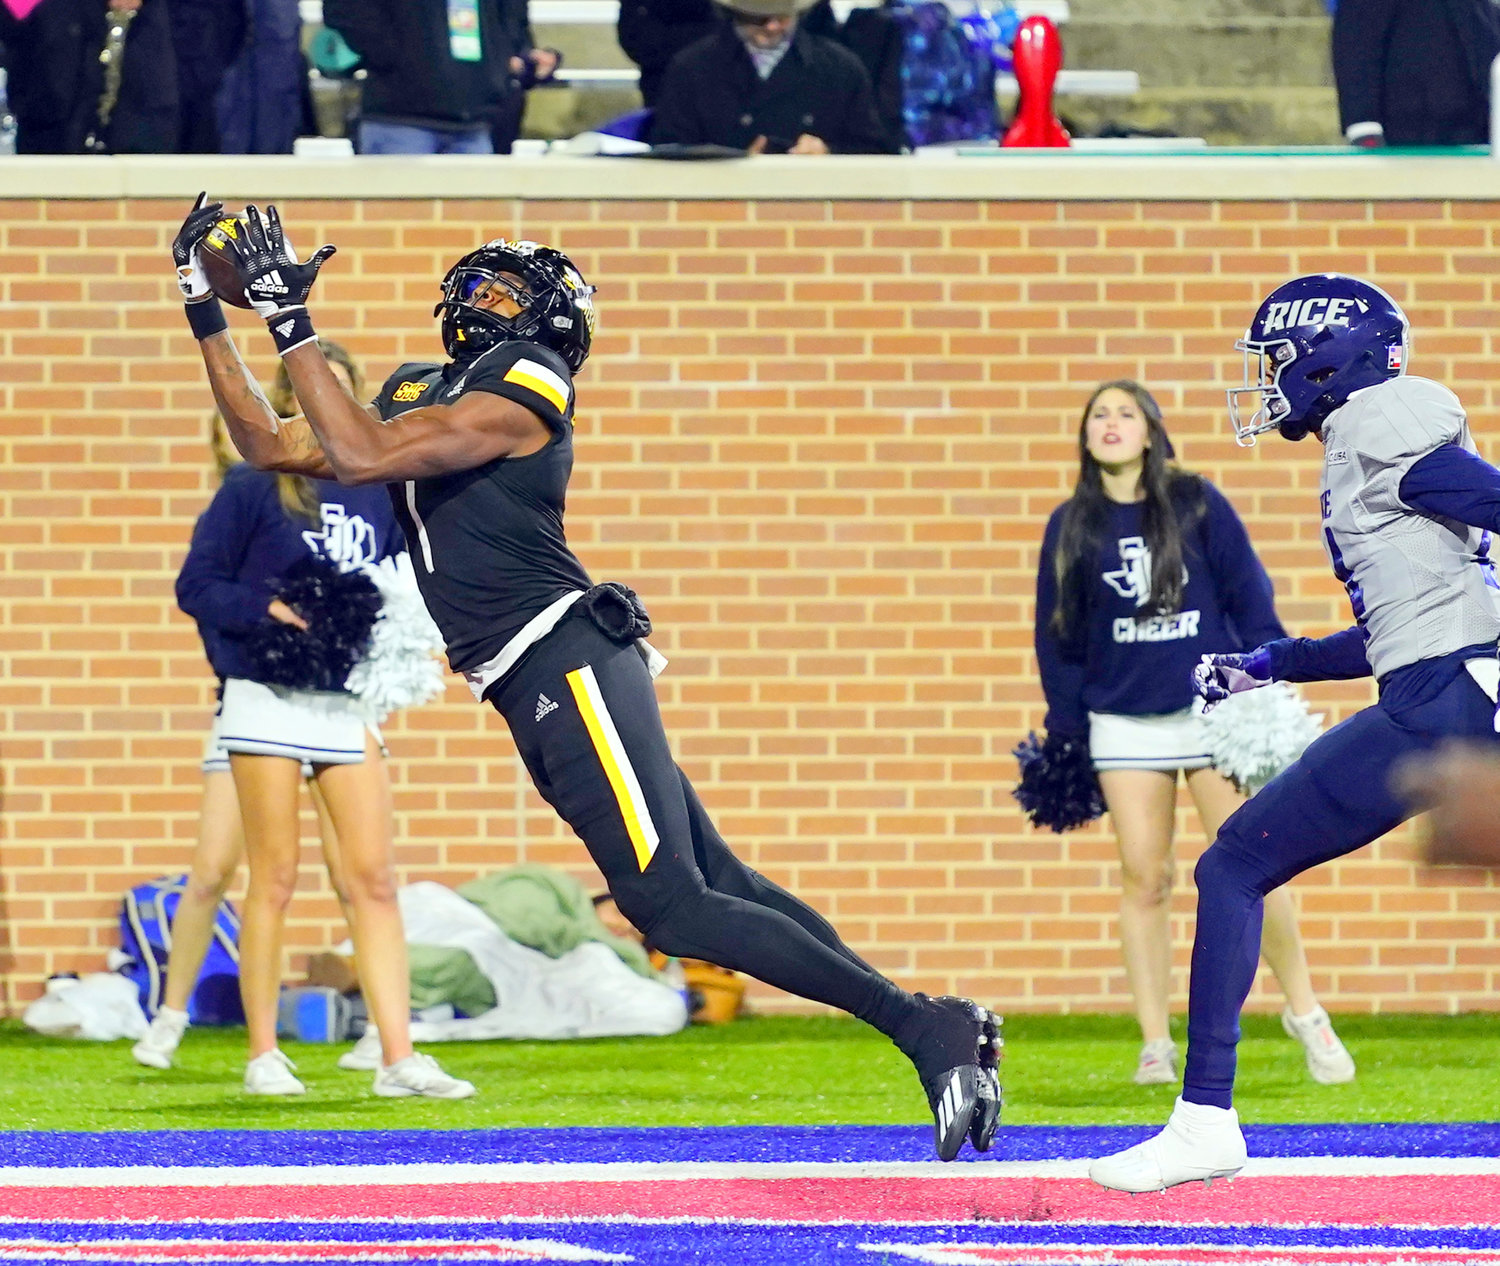 Southern Miss senior Jason Brownlee extends for a fourth-quarter touchdown reception that helped the Golden Eagles take down Rice 38-24 in the Lending Tree Bowl Saturday night at Mobile’s Hancock Whitney Stadium.